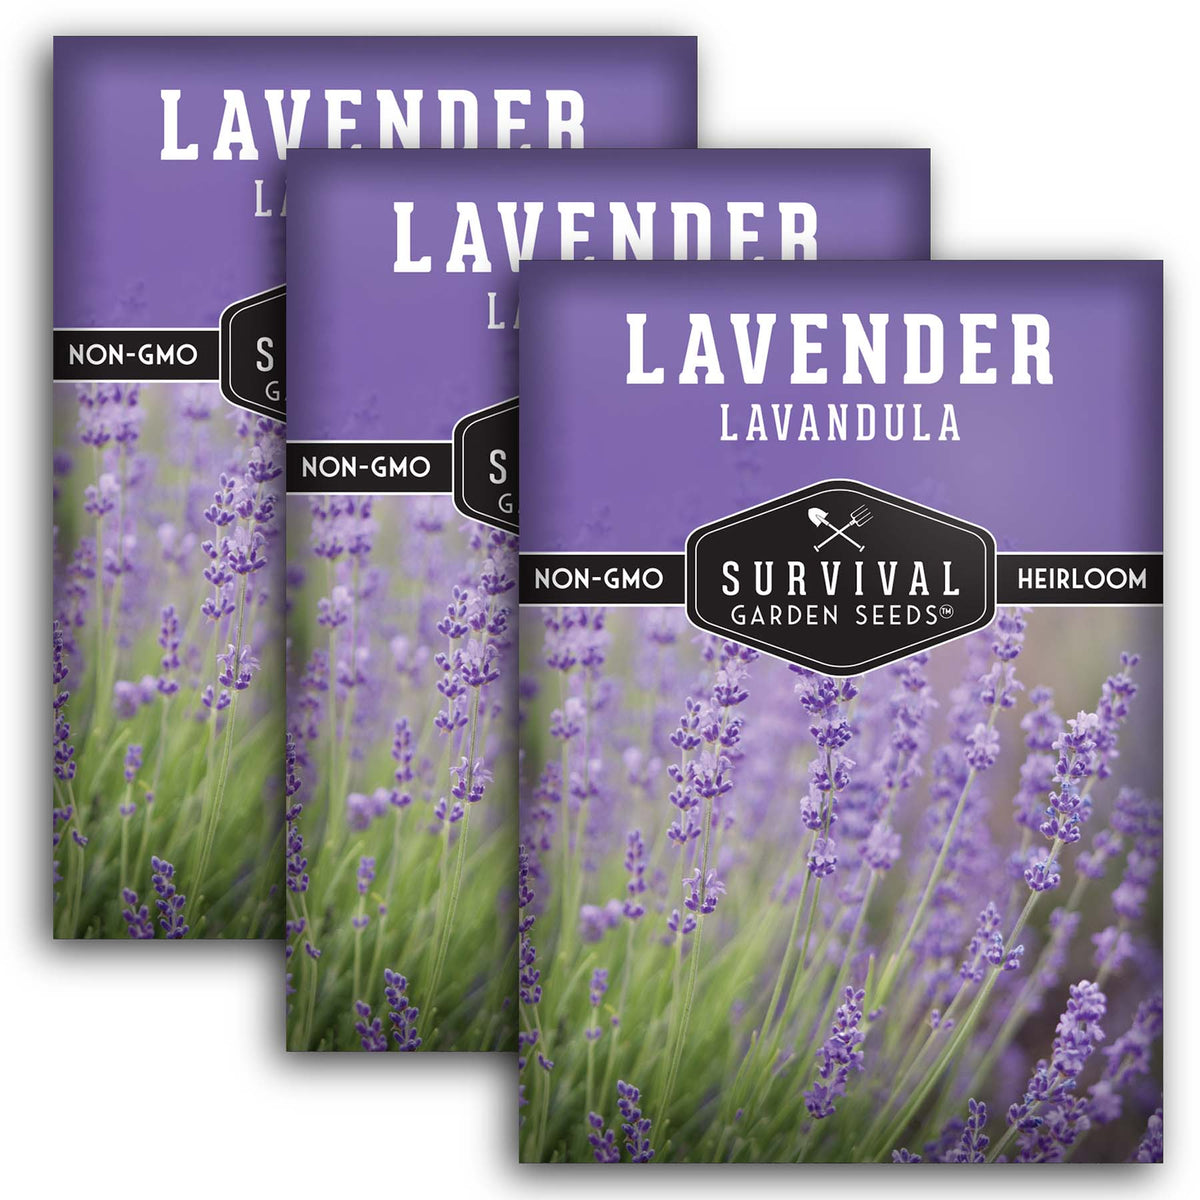 Lavender seed packets quantity 3